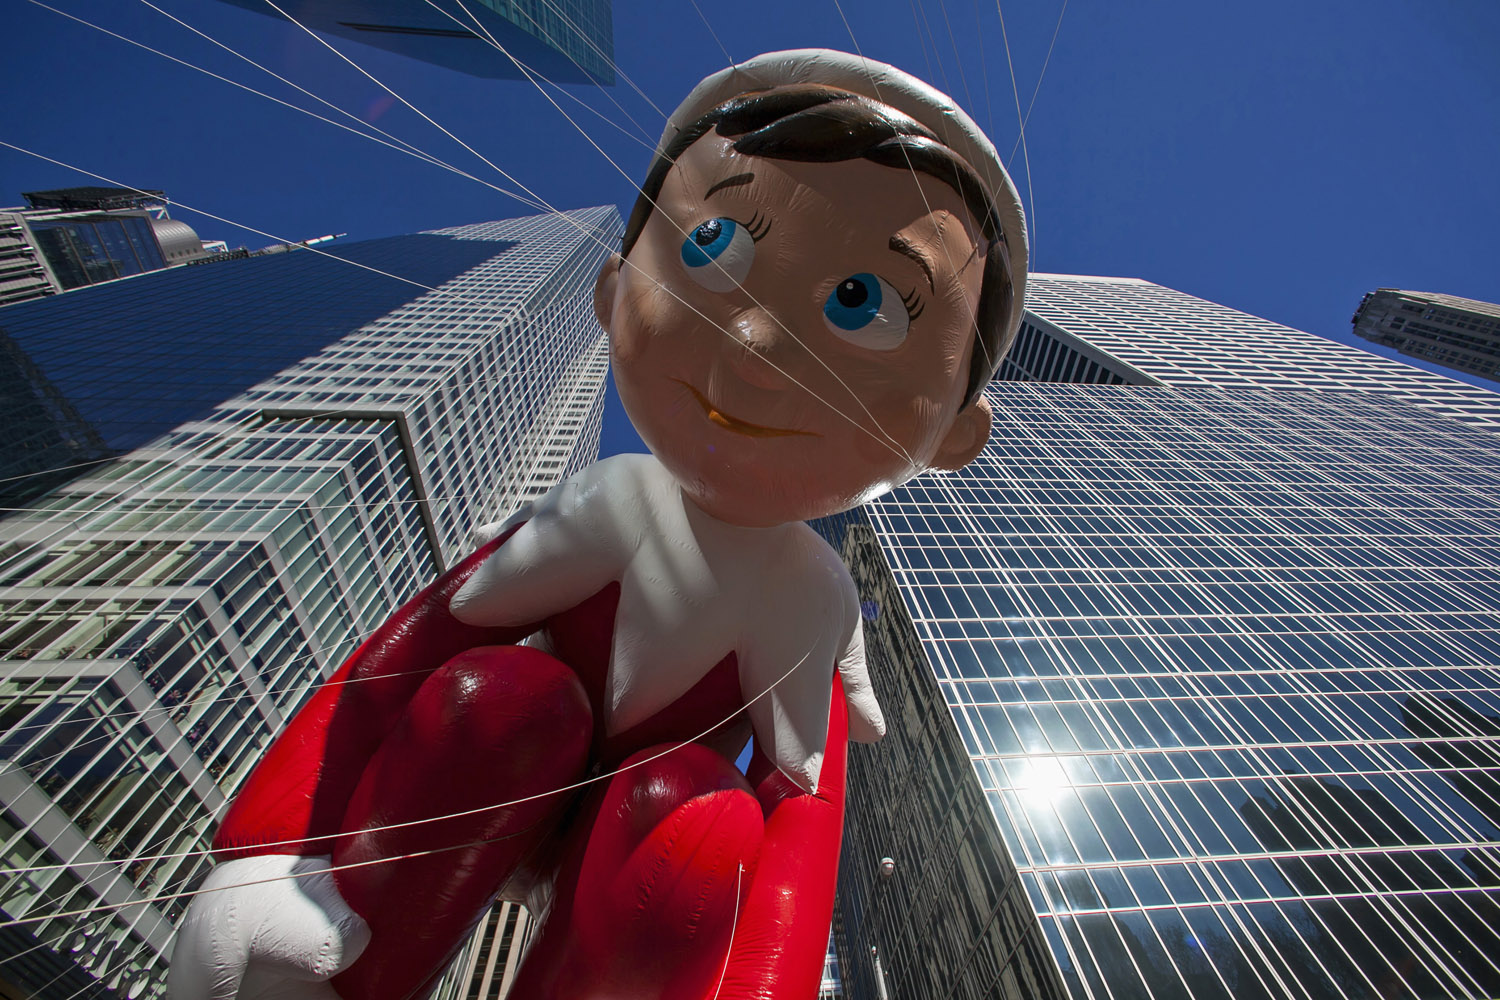 The Elf on the Shelf balloon floats down Sixth Avenue during the 87th Macy's Thanksgiving Day Parade in New York